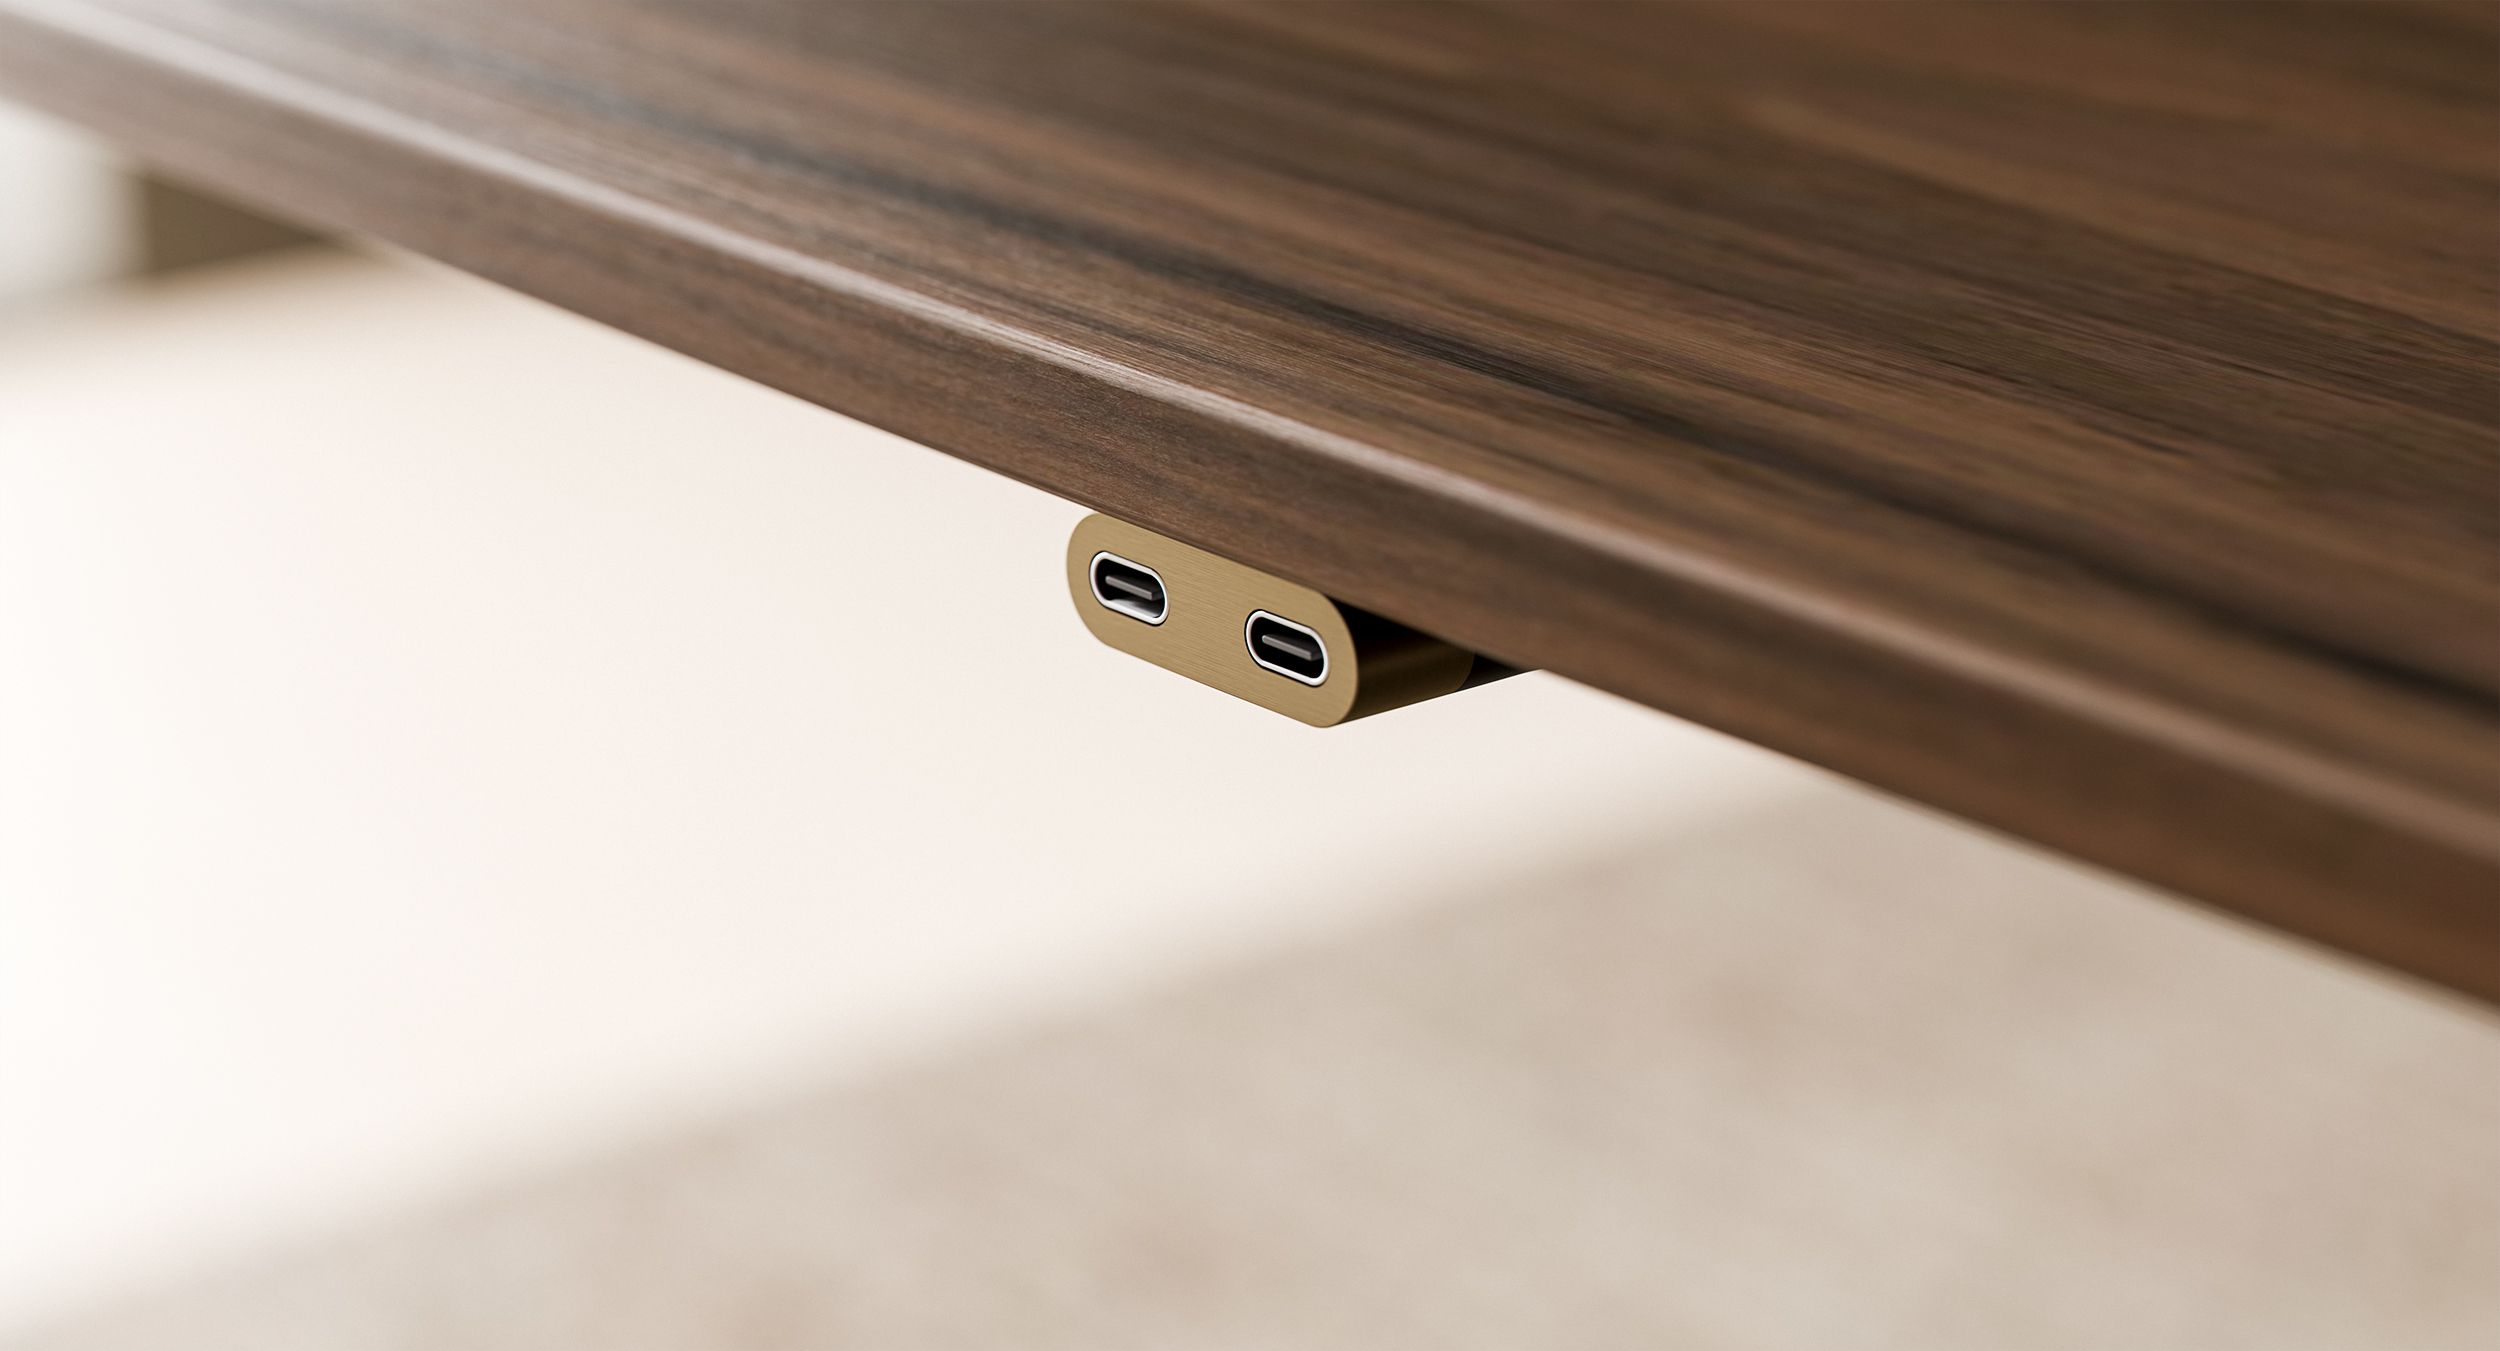 Dual USB-C and USB-C-HDMI perimeter power is offered in a variety of luxurious brushed metal finishes.